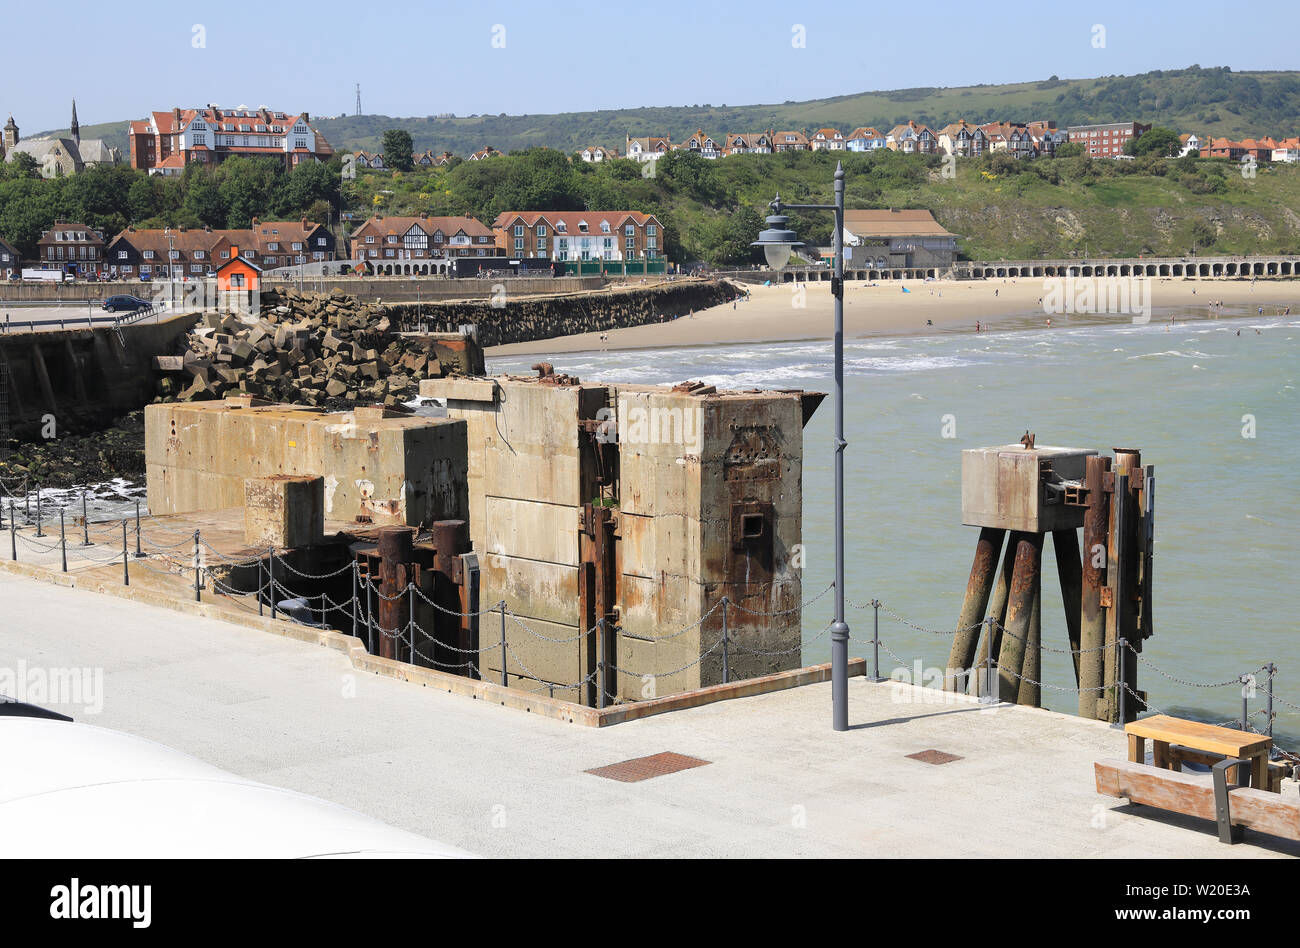 Concrete plinths or 'dolphins' on the Harbour Arm in Folkestone, previously used for roll-on-roll-off ferries, before they stopped running, in Kent UK Stock Photo